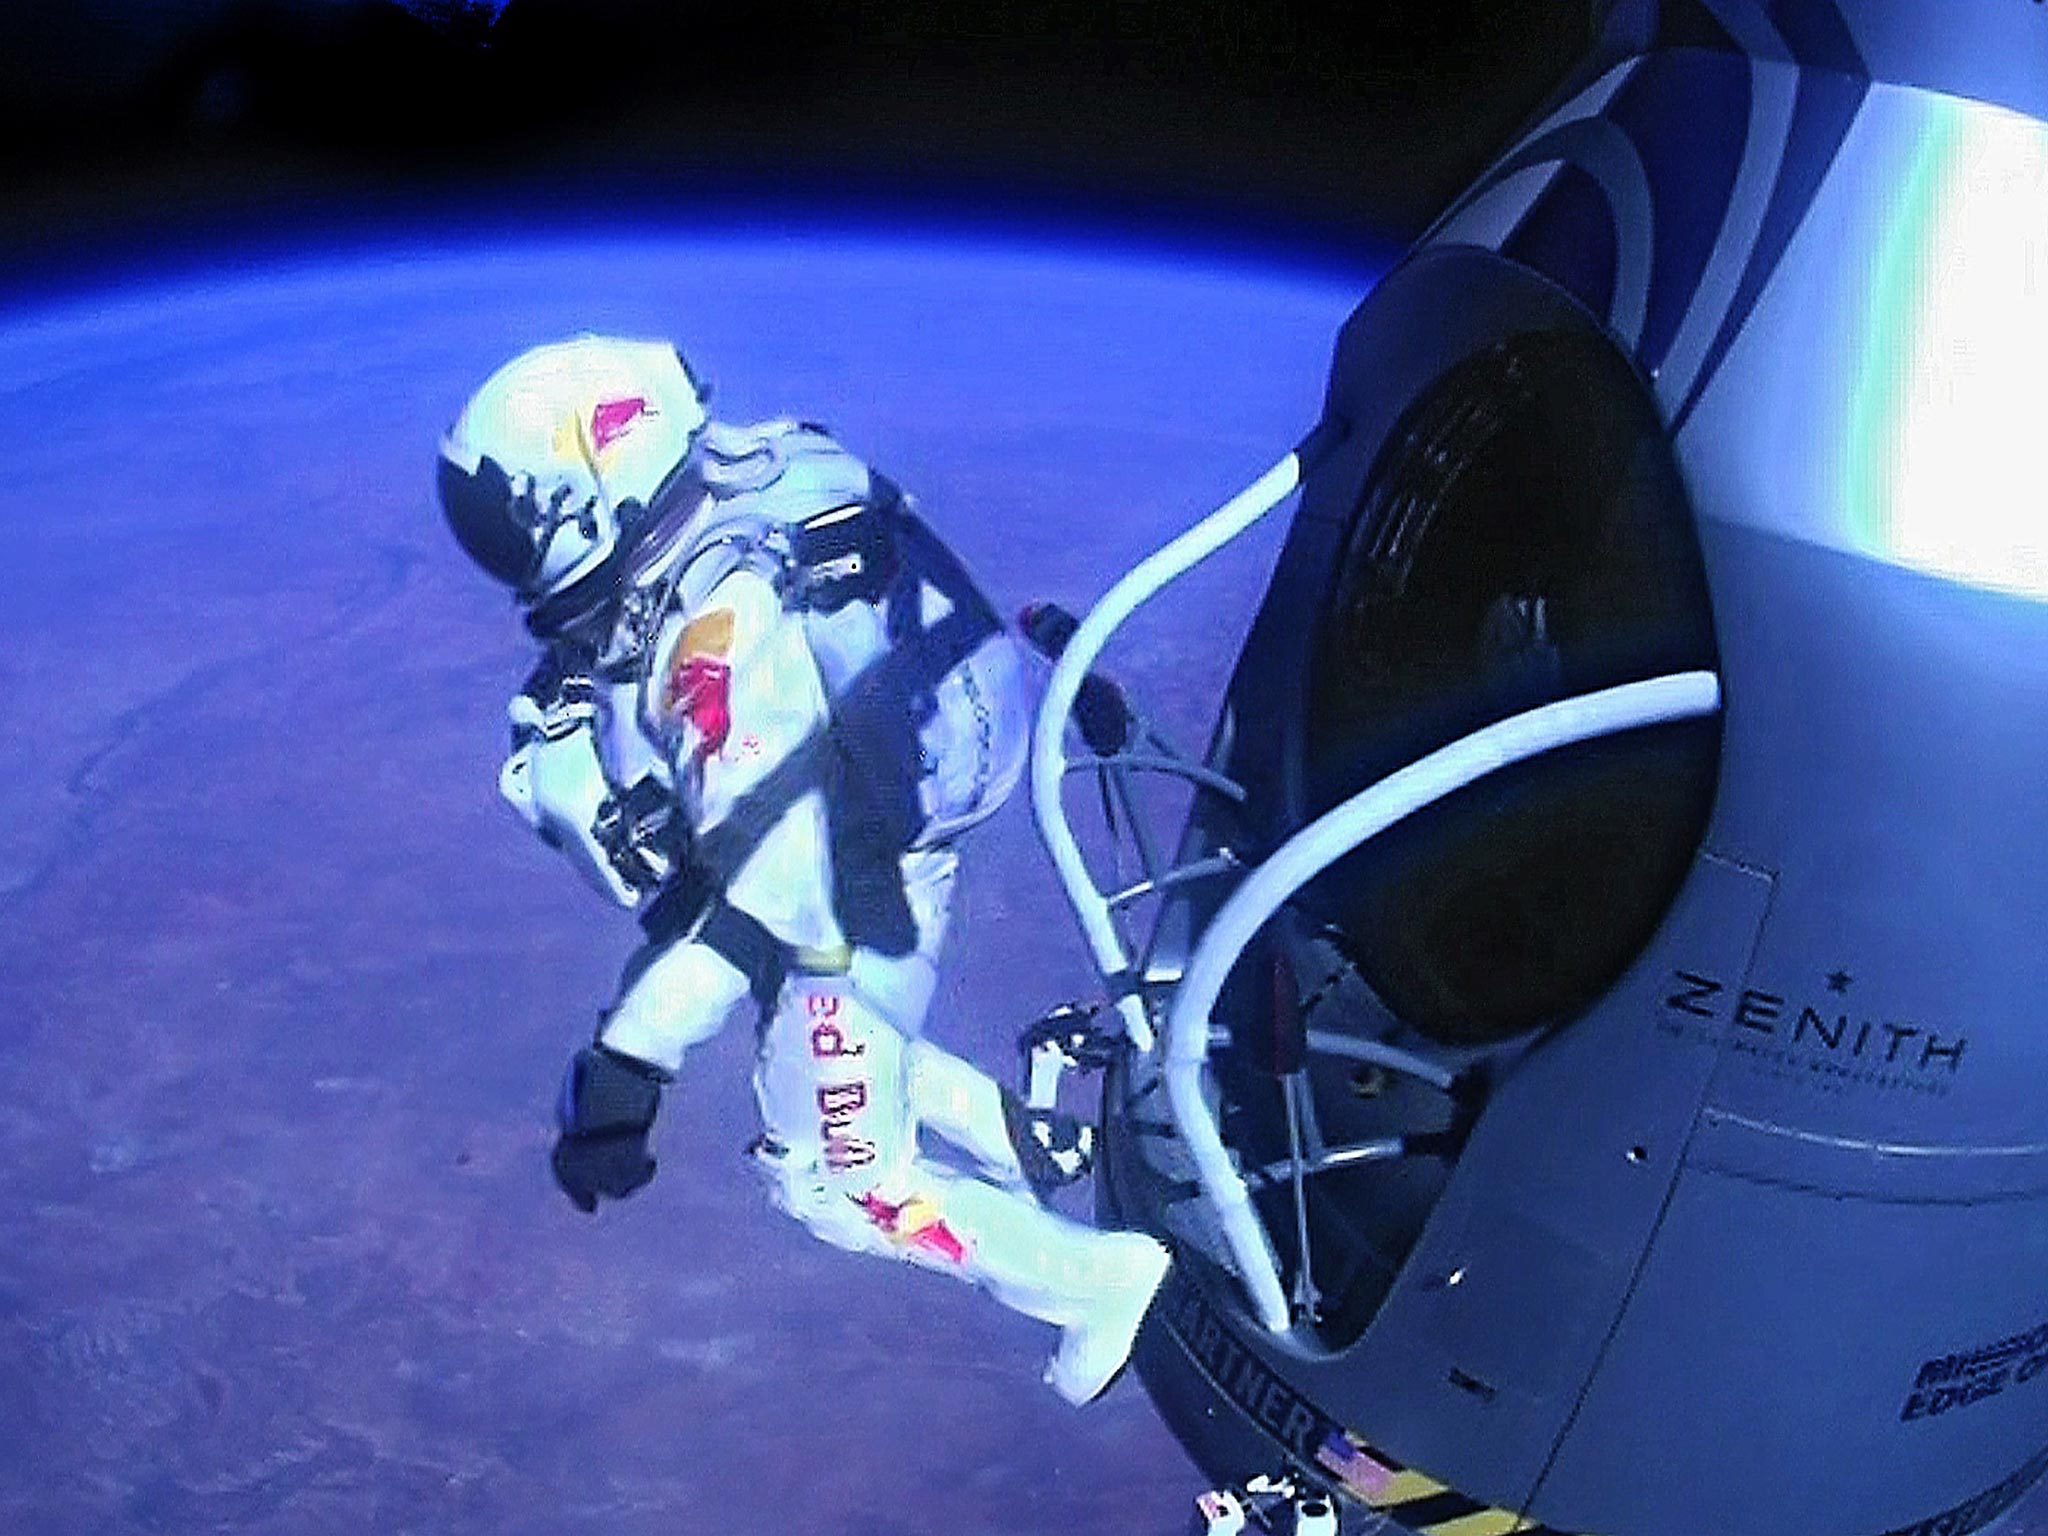 The moment Felix Baumgartner beings his descent to Earth